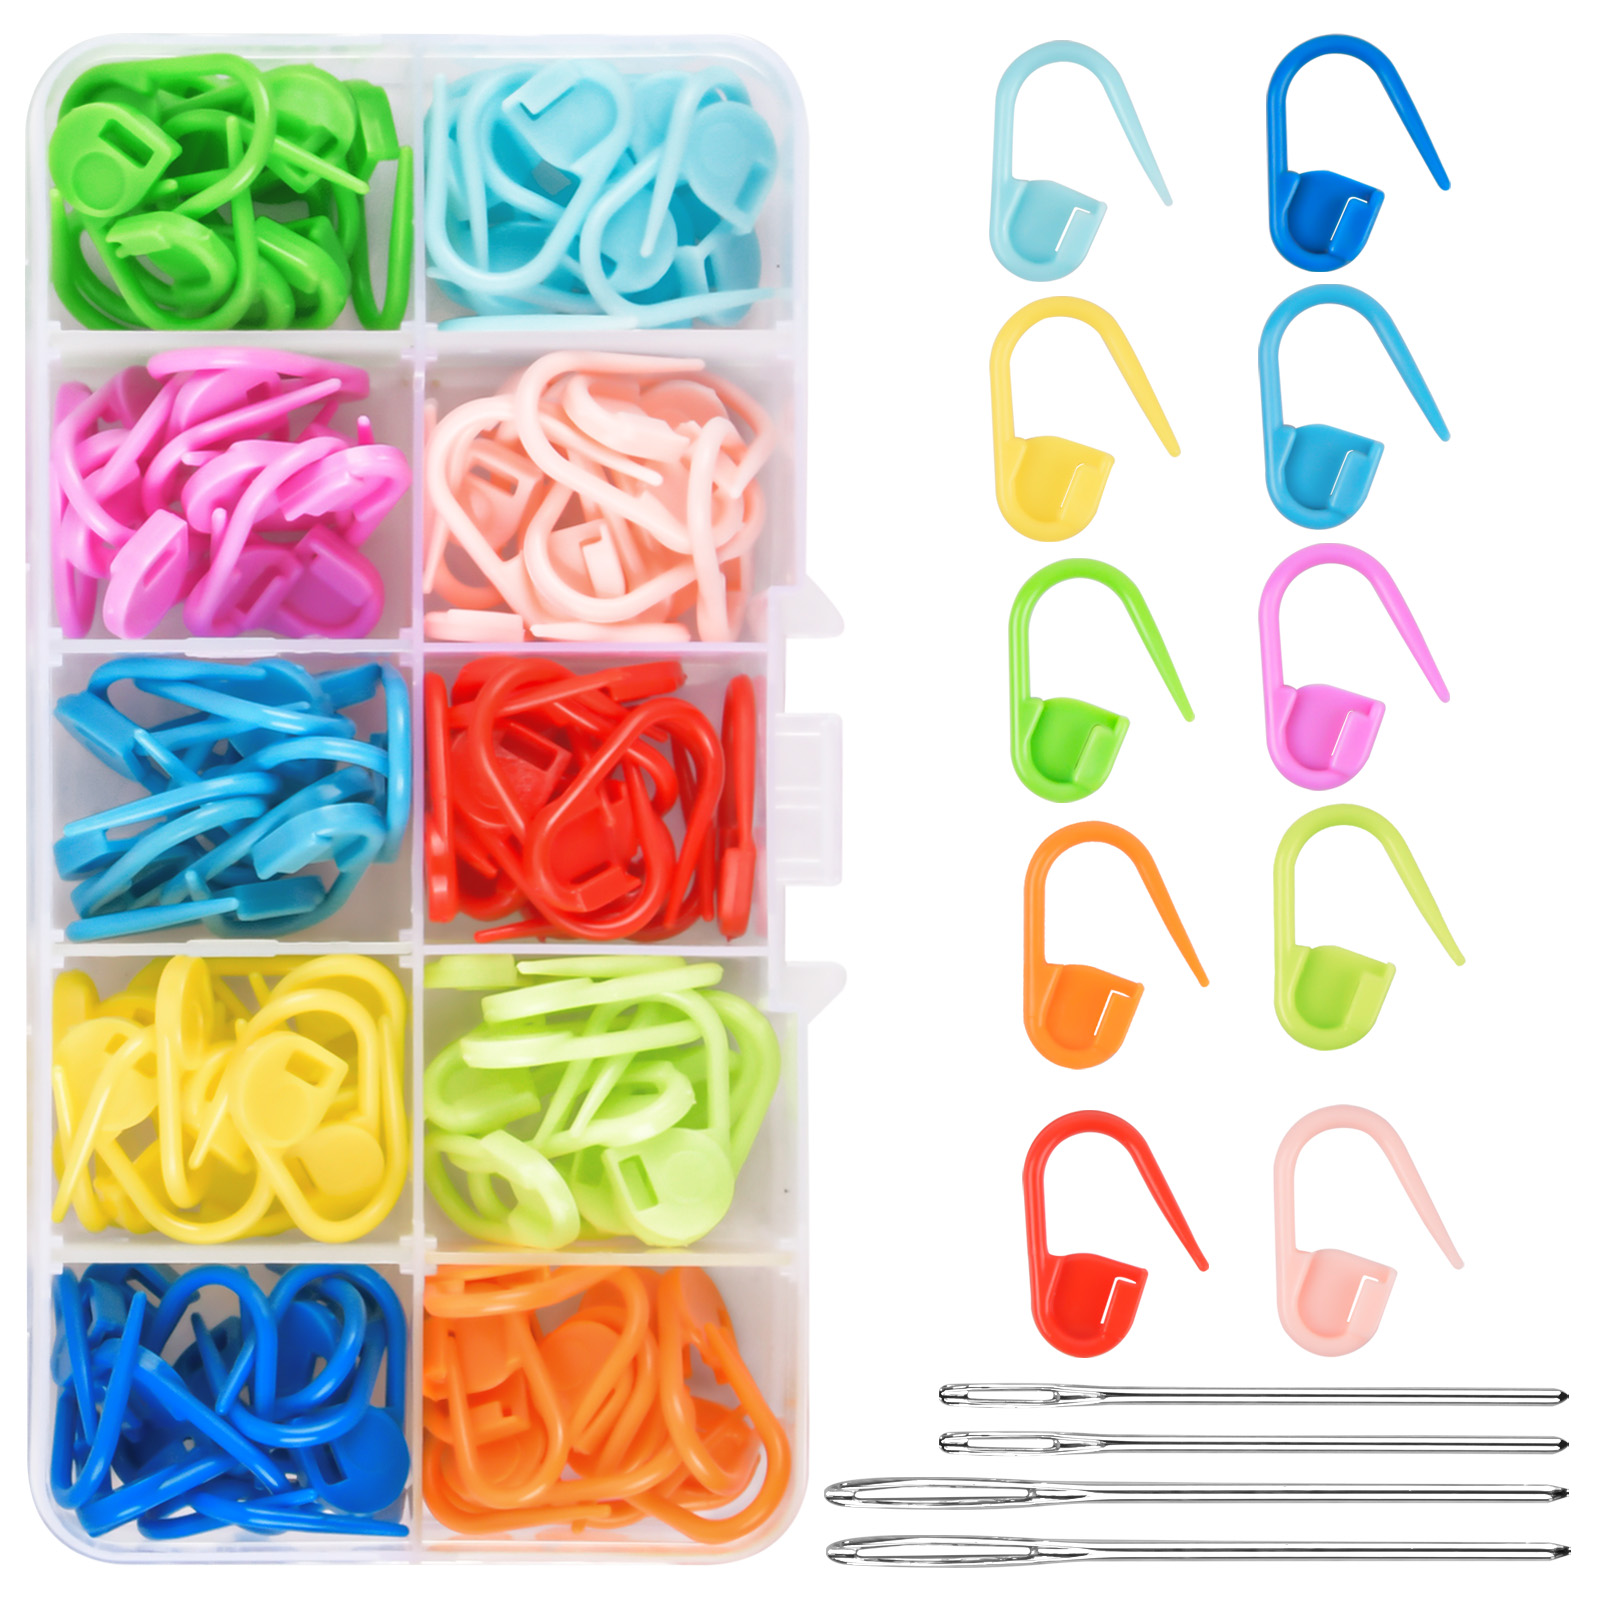 Stitch Markers For Crocheting Colorful Knitting Markers - Temu